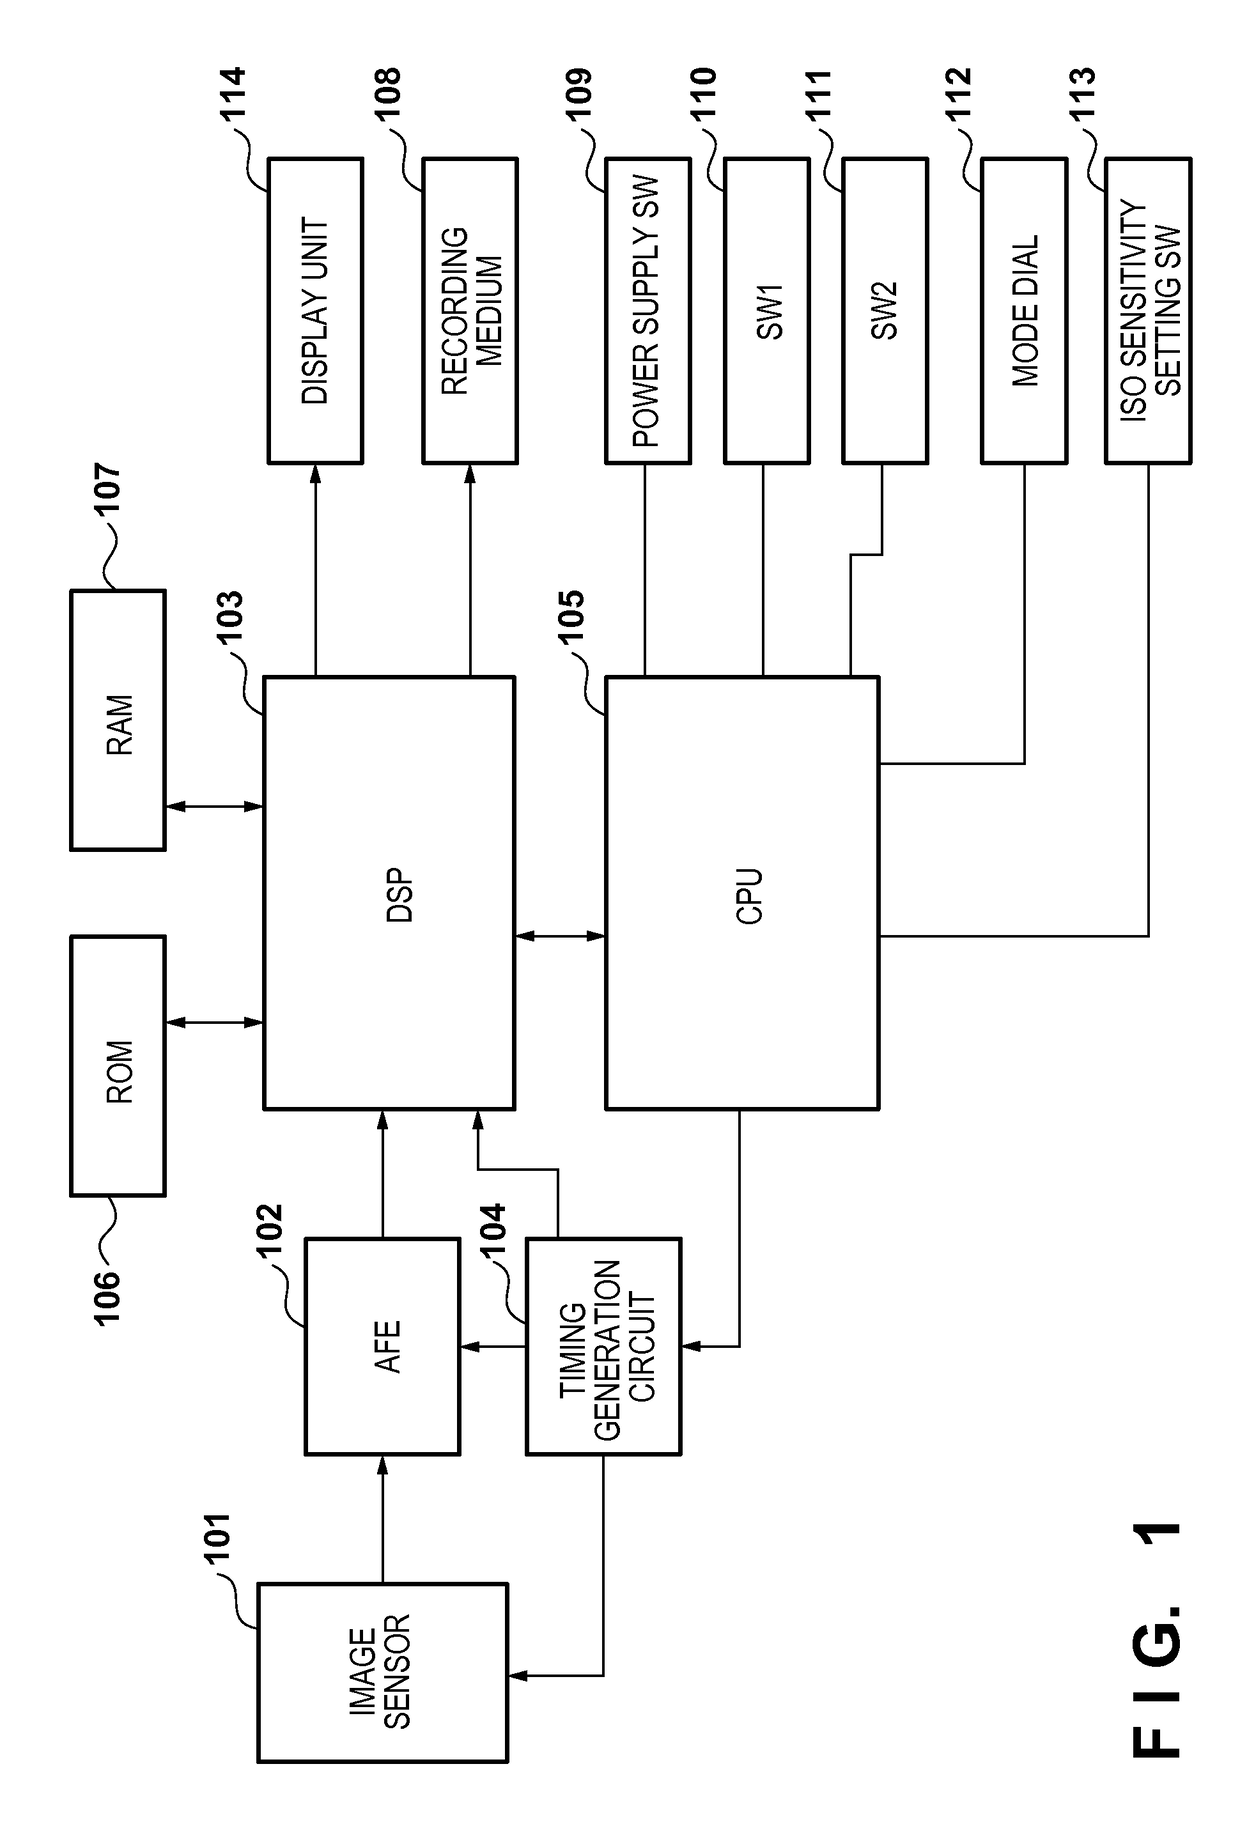 Image capturing apparatus and method for controlling image capturing apparatus